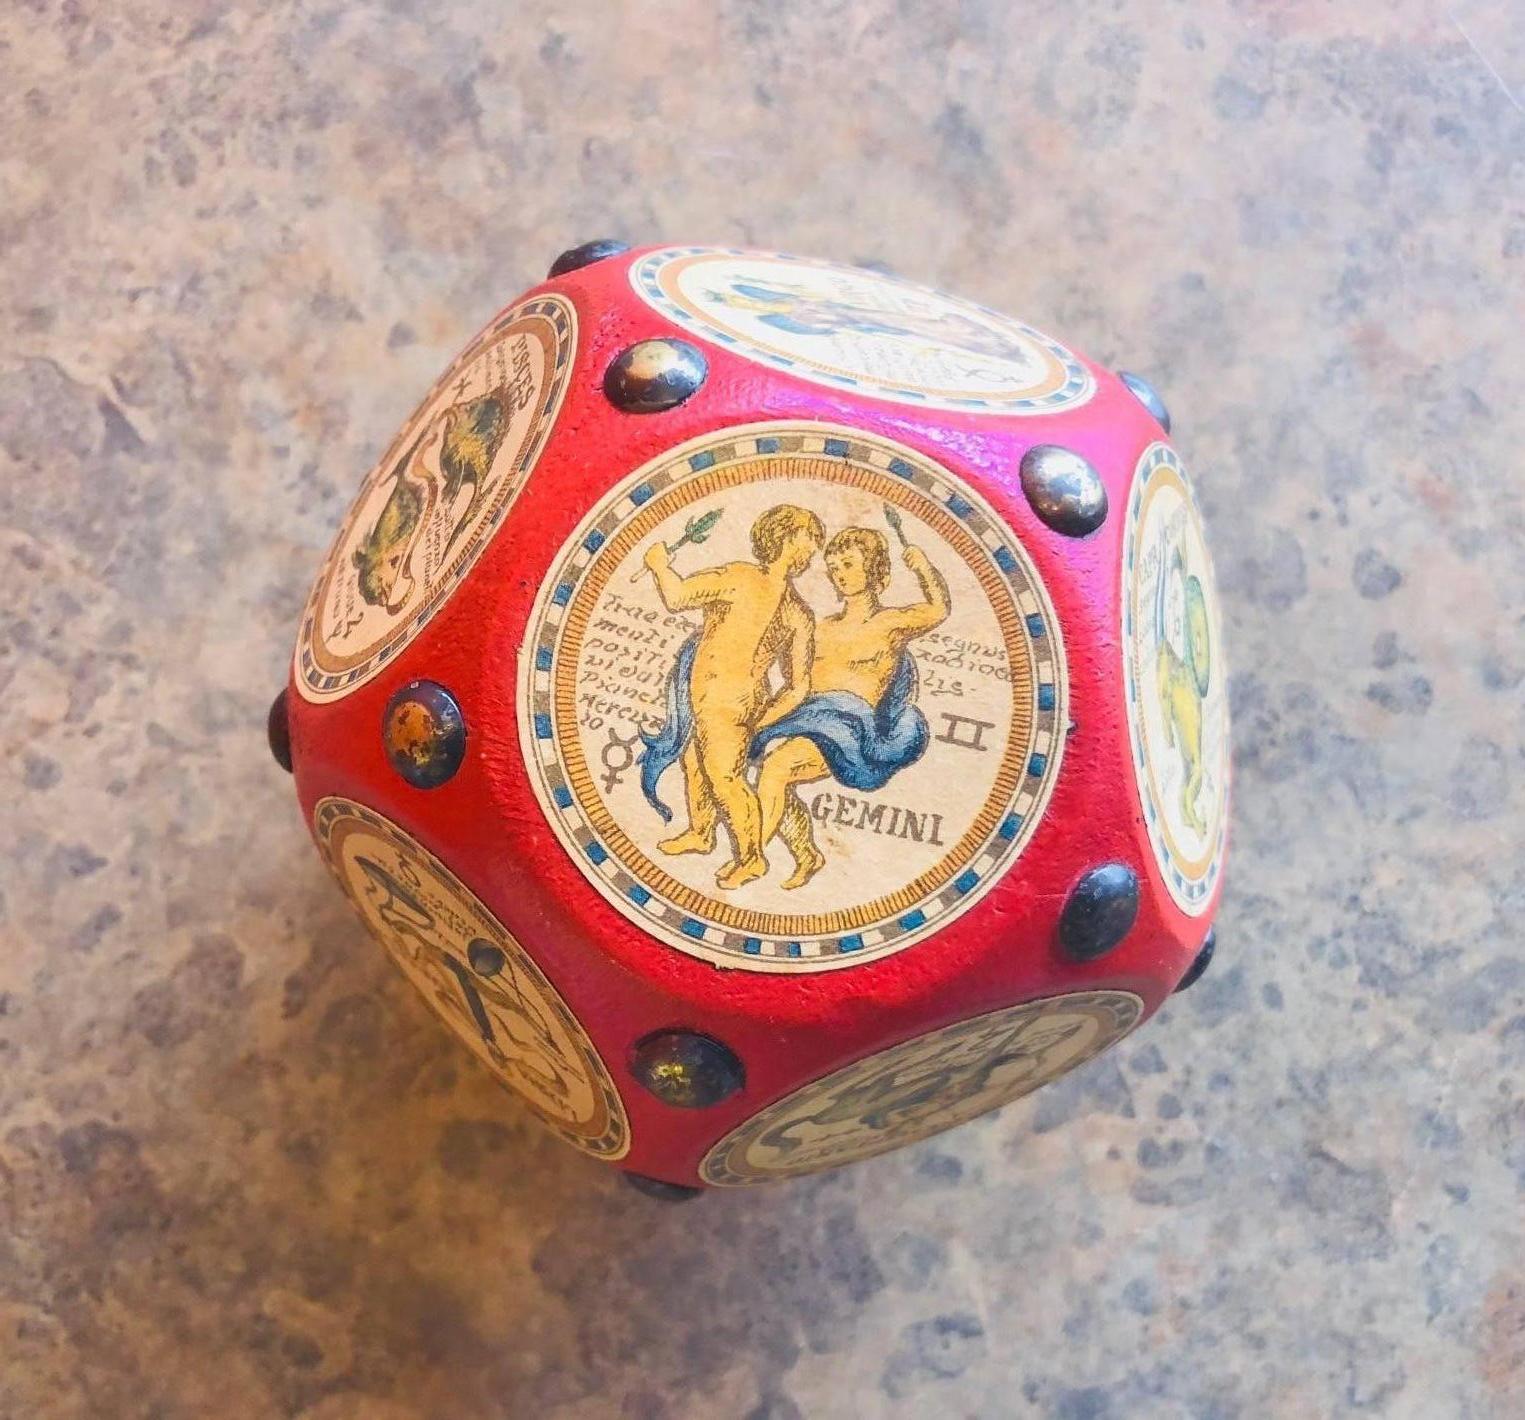 A rare Italian dodecahedron paperweight with the 12 signs of the Zodiac prominently displayed. The astrological signs are beautifully illustrated and the writing appears to be in Latin or Italian; each picture is a well crafted celestial